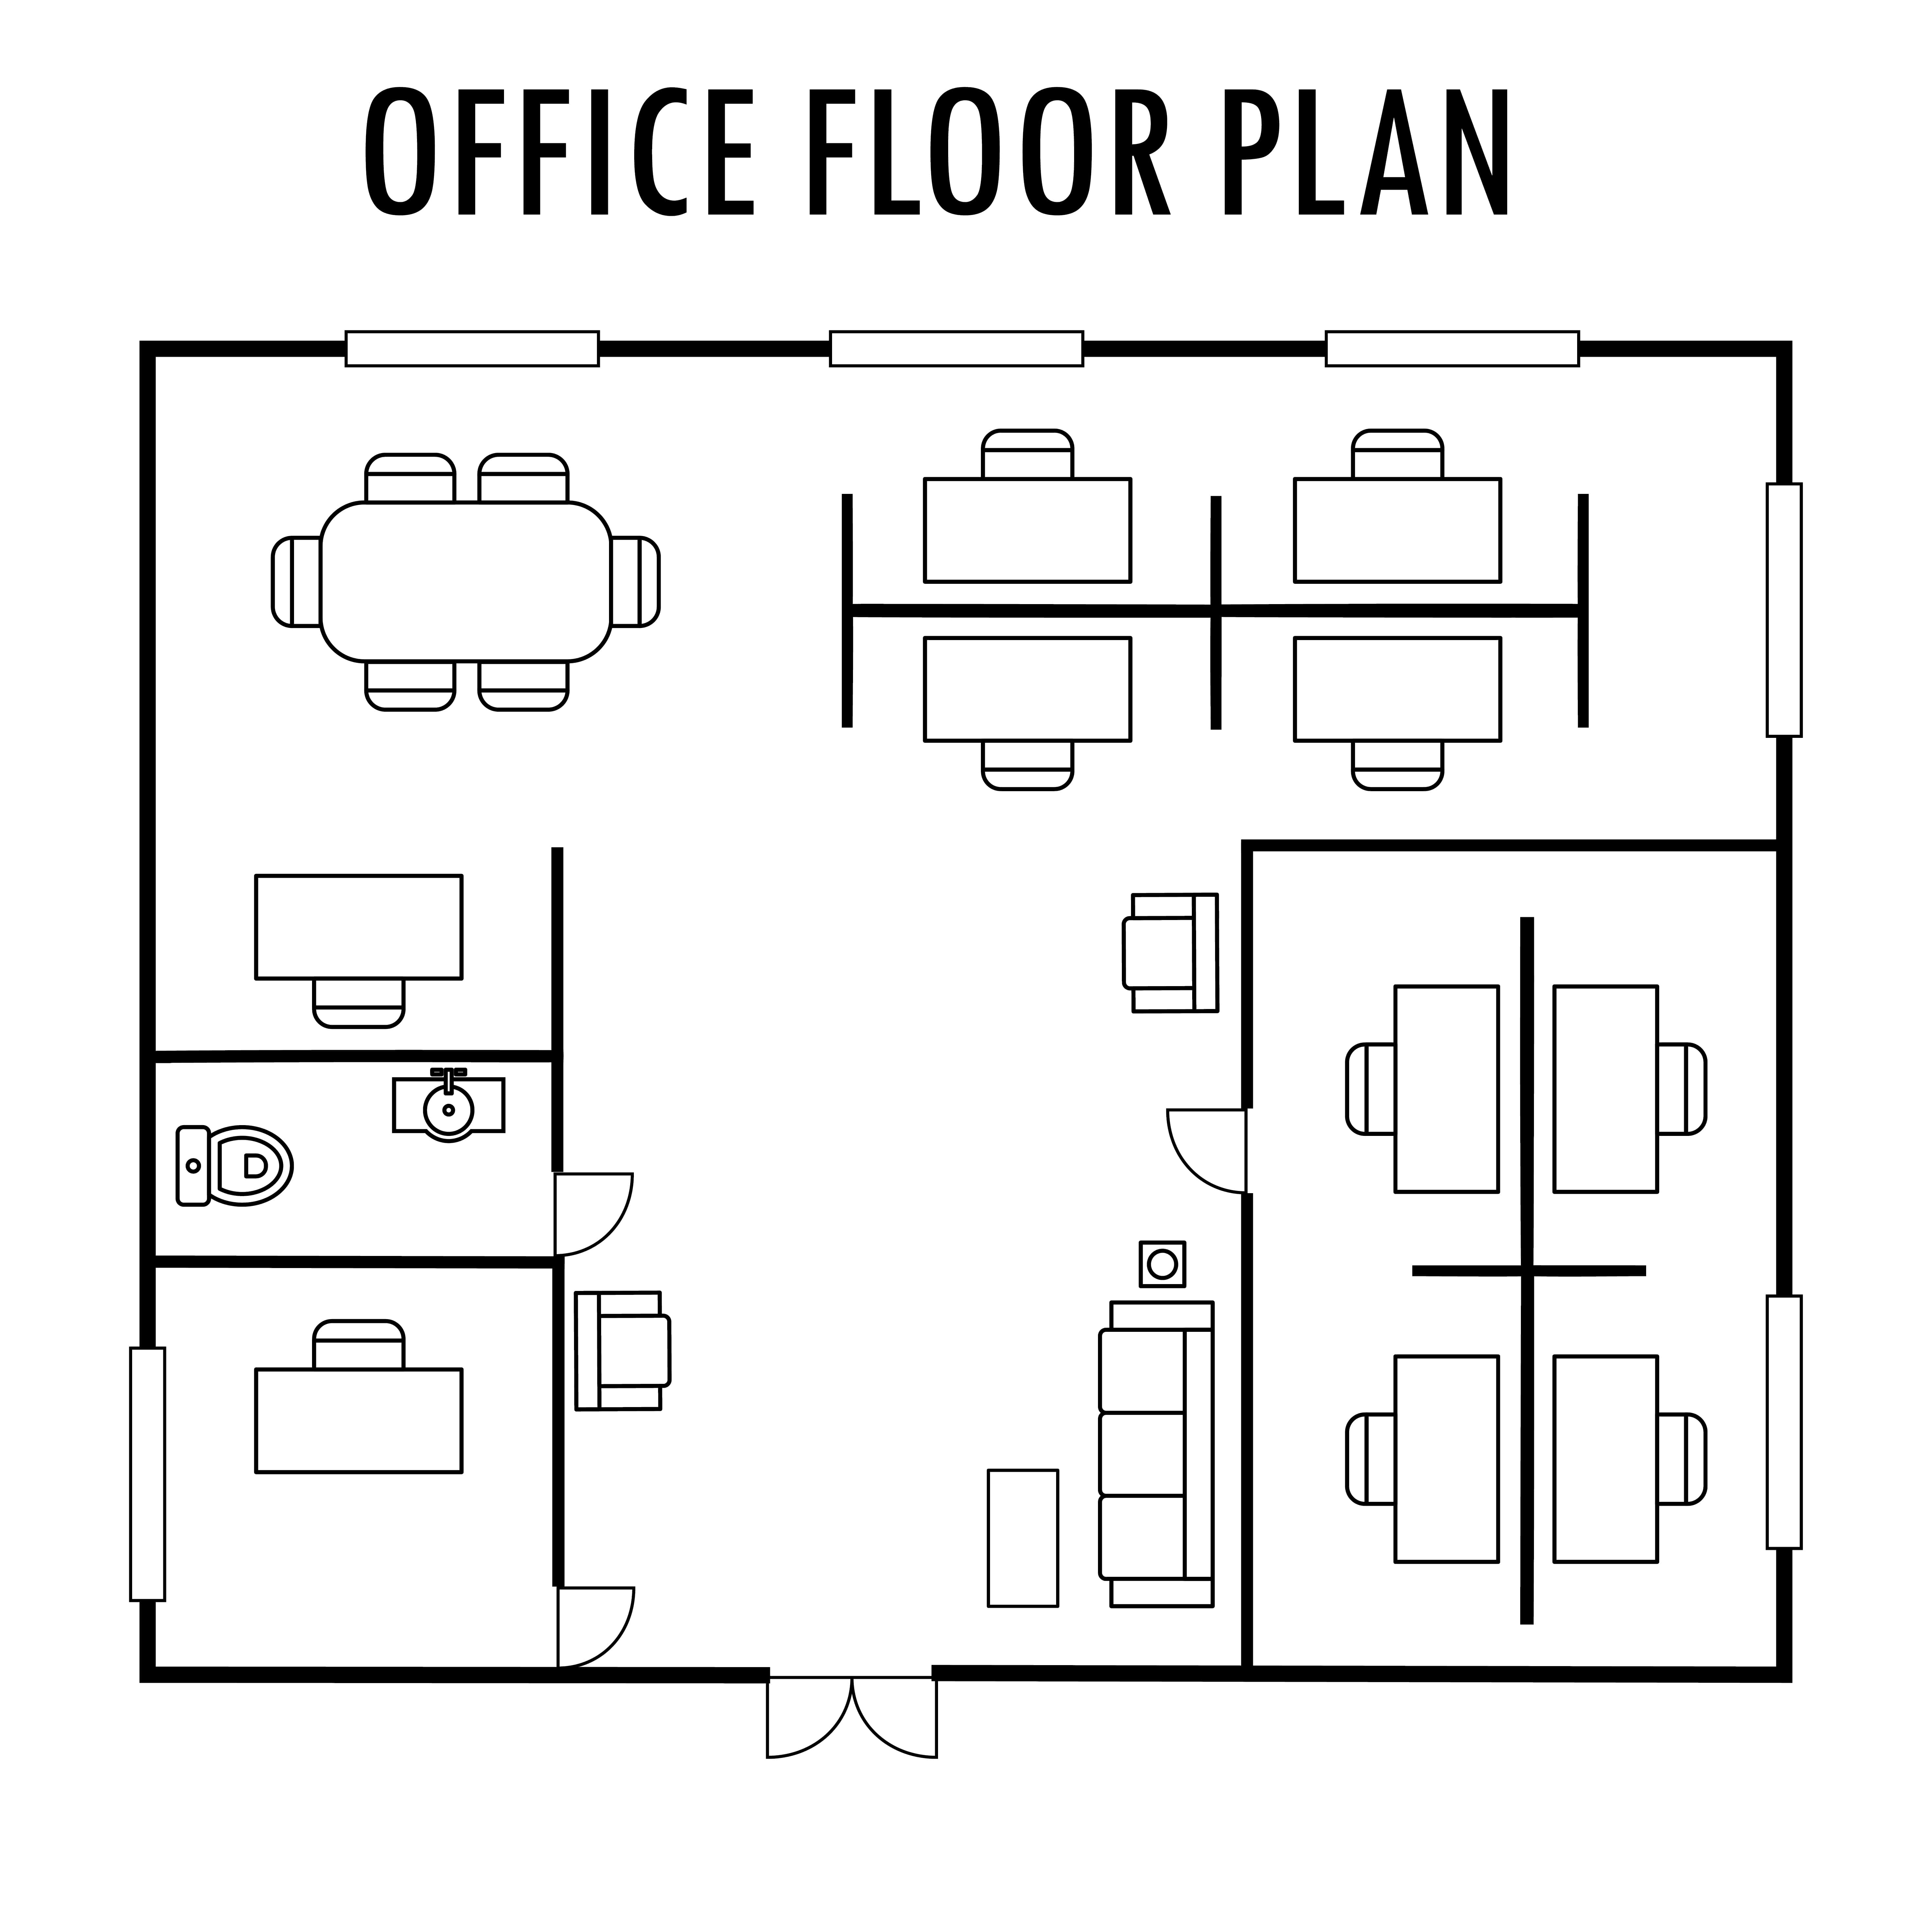 How To Draw A Floor Plan For Your Office Illustration vrogue.co